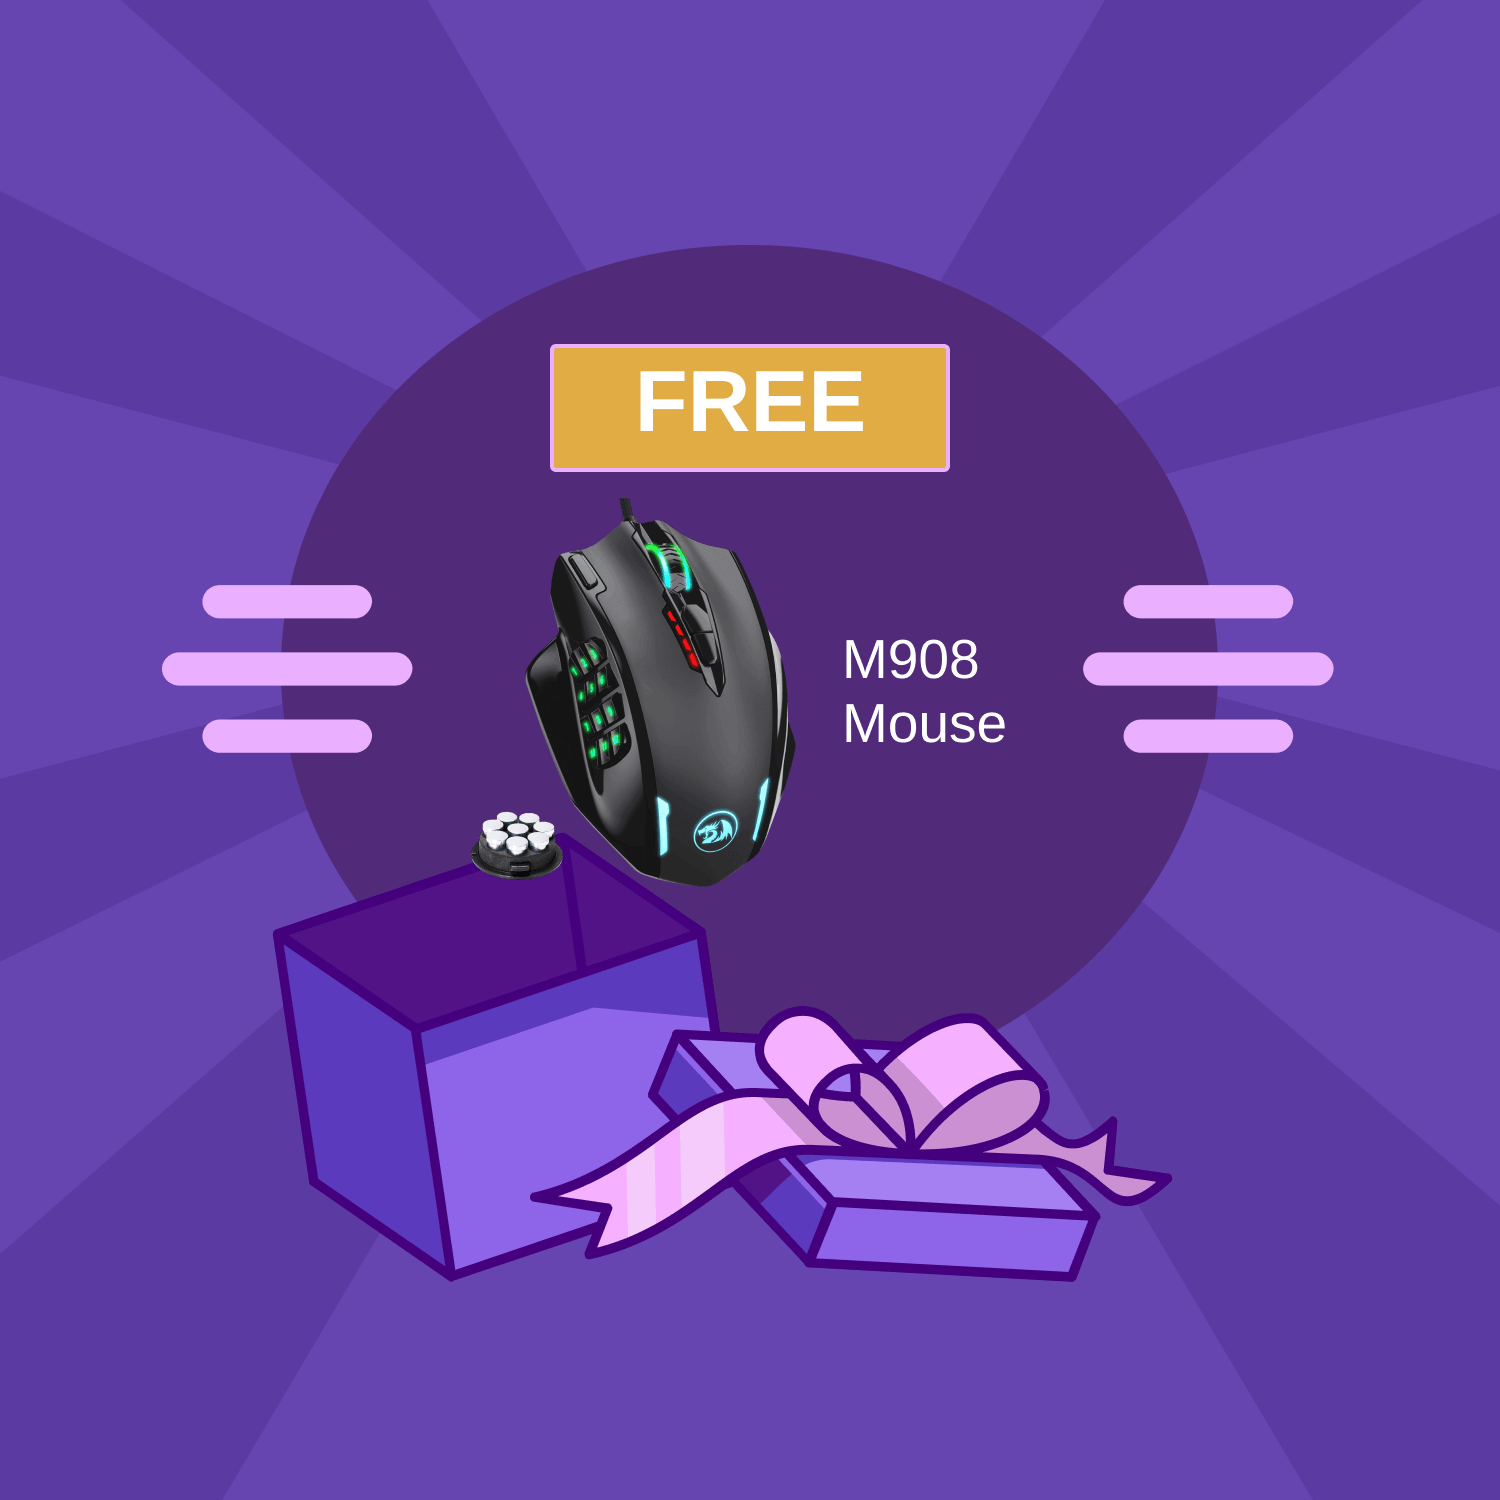 Redragon 3rd Anniversary Mystery Box free m908 mouse